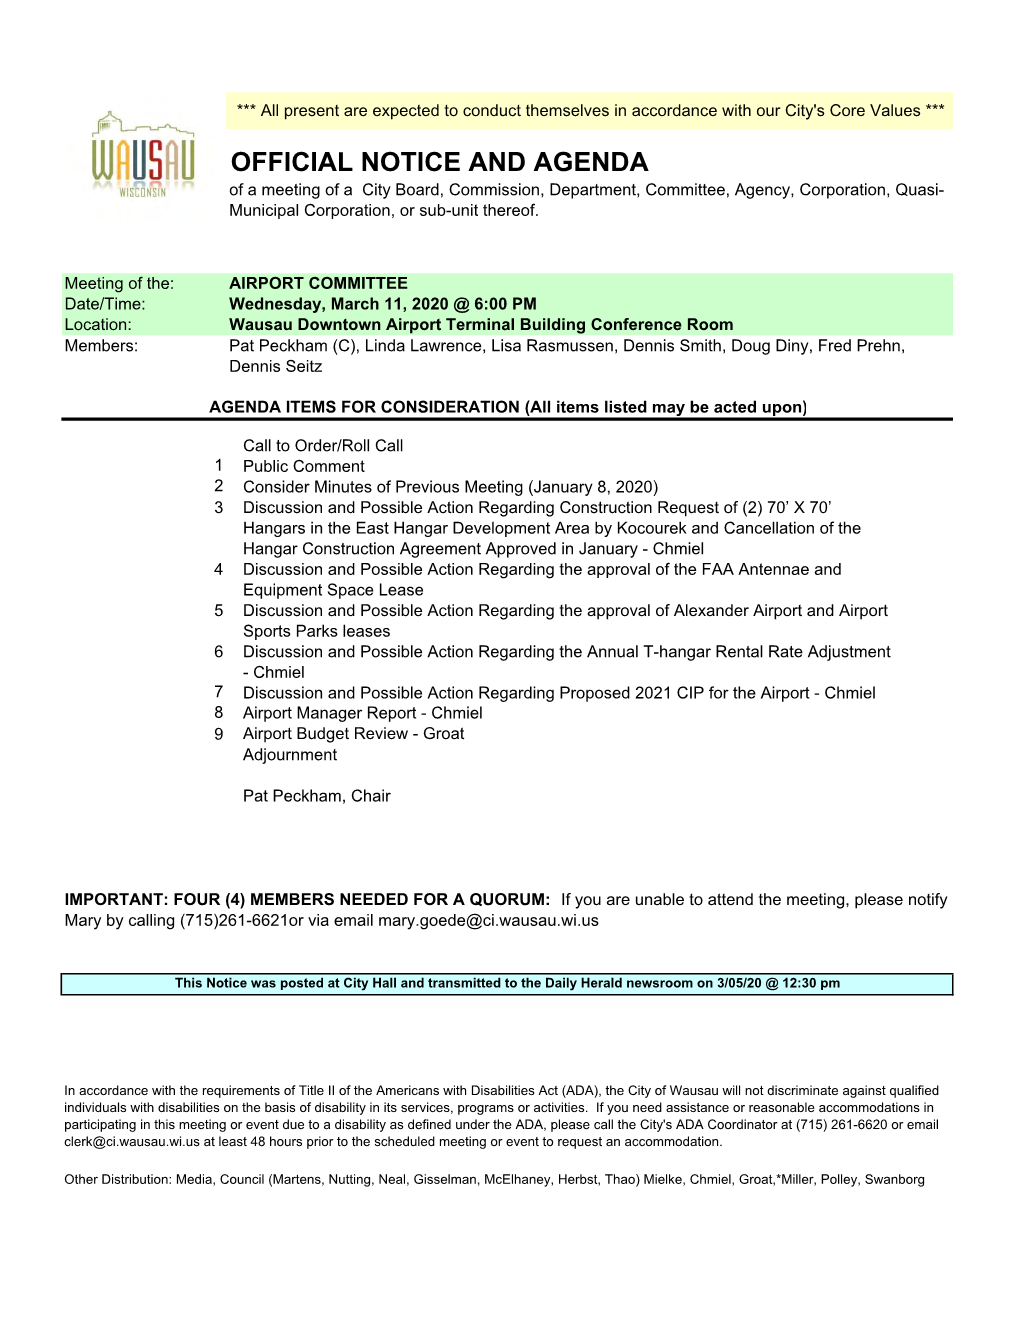 OFFICIAL NOTICE and AGENDA of a Meeting of a City Board, Commission, Department, Committee, Agency, Corporation, Quasi- Municipal Corporation, Or Sub-Unit Thereof